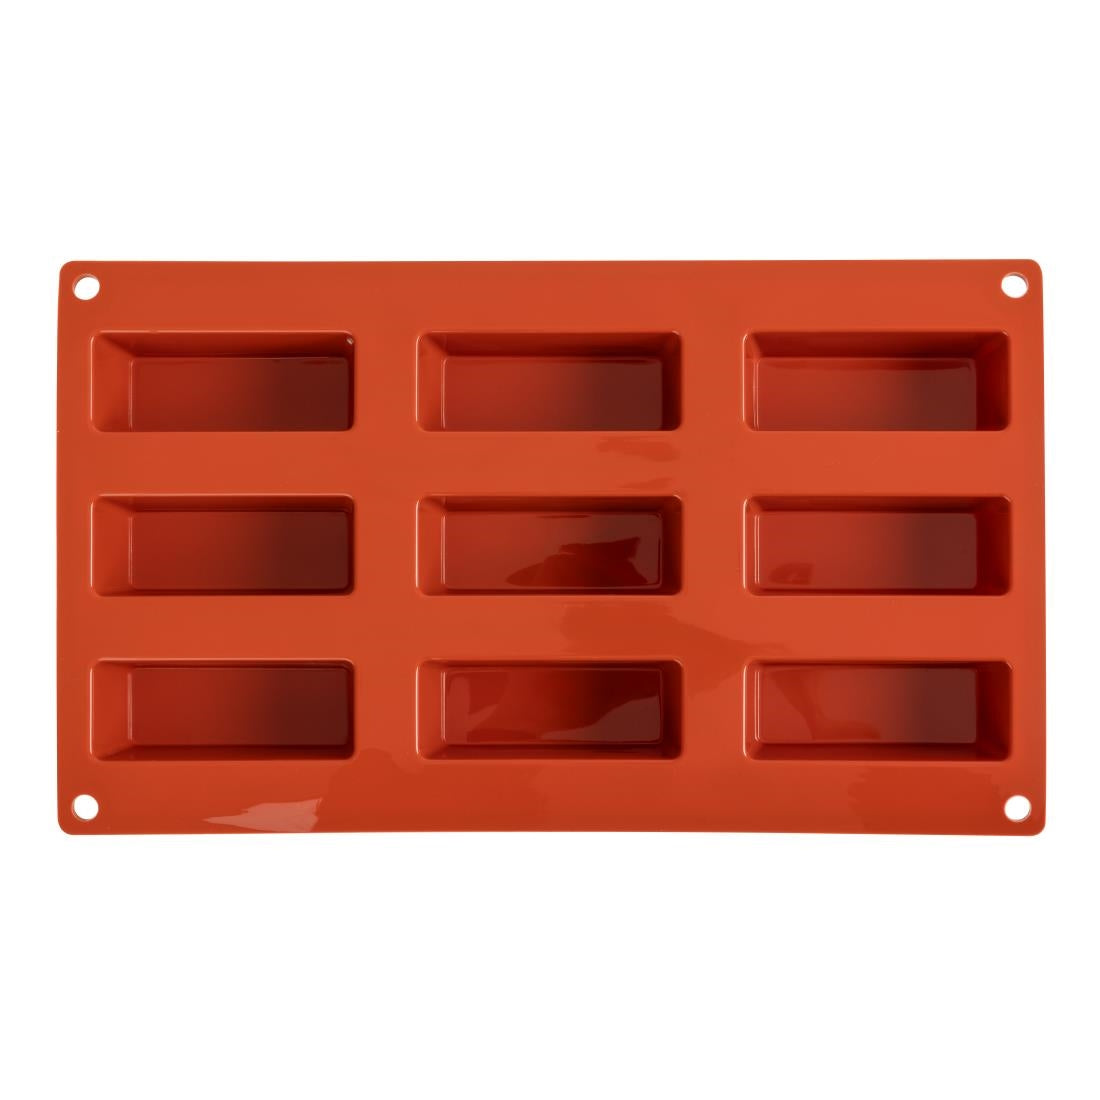 N941 Pavoni Formaflex Silicone Cake Mould 9 Cup